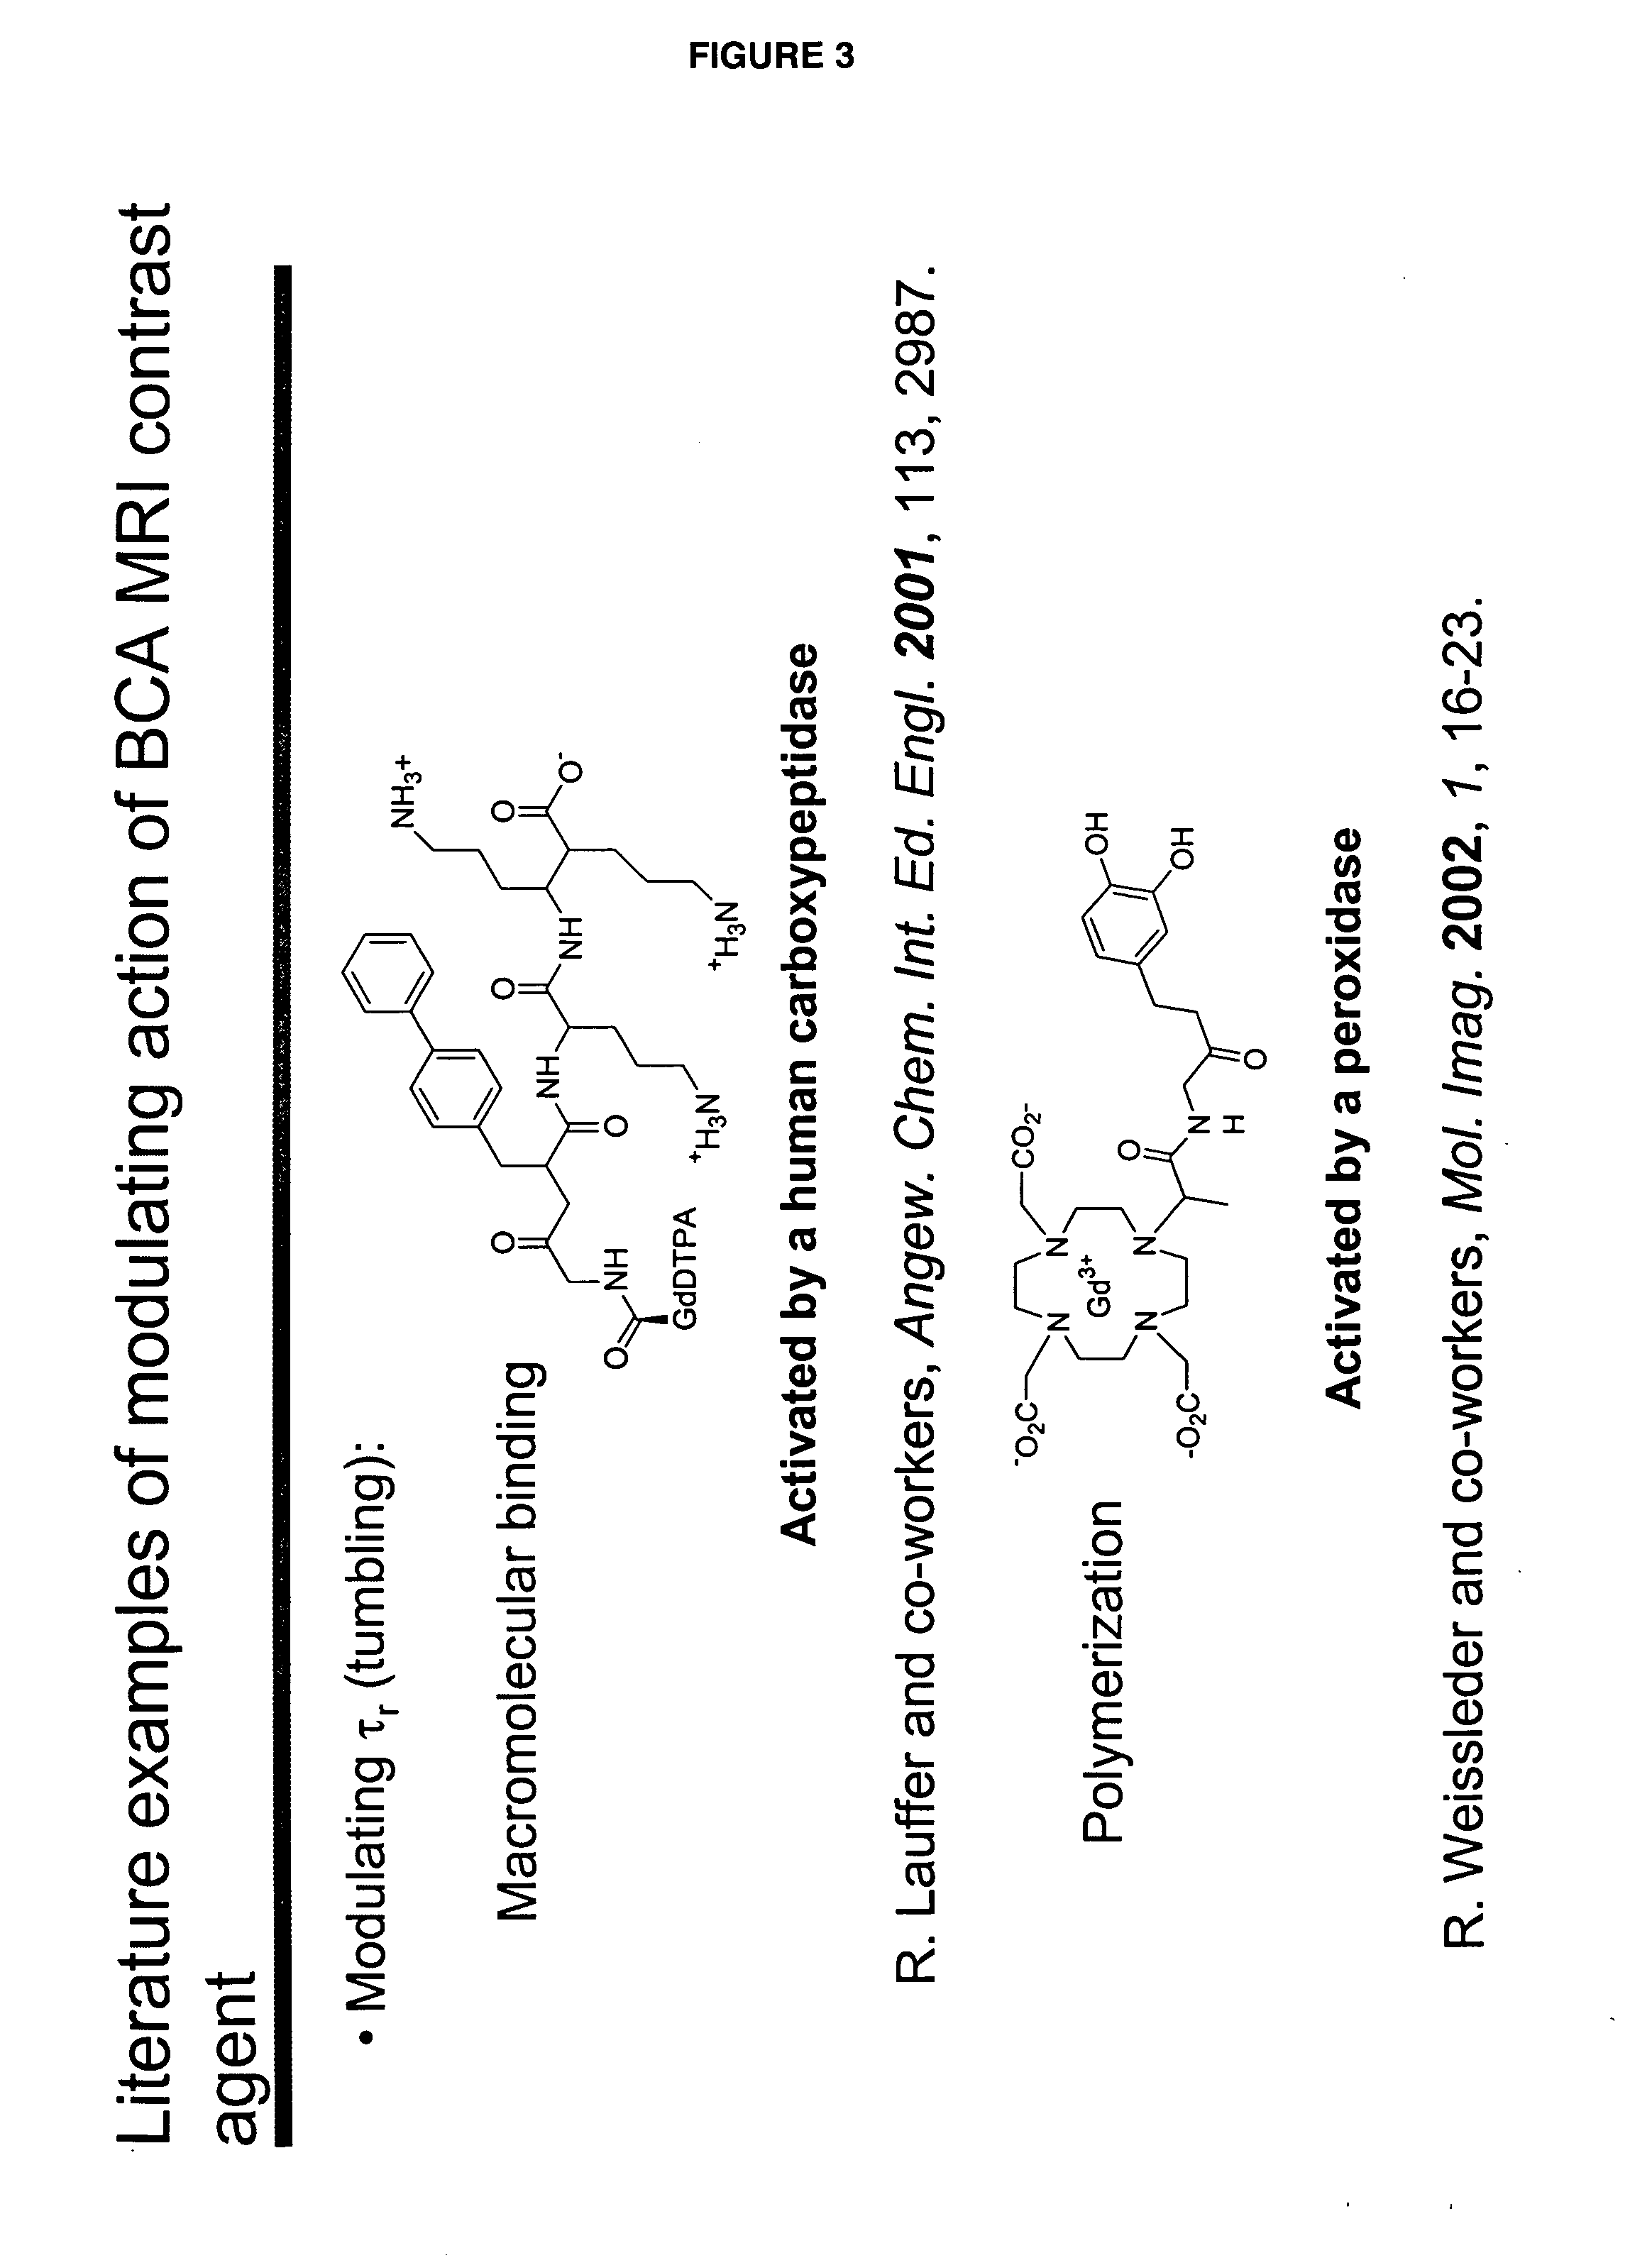 Biochemically-activated contrast agents for magnetic resonance imaging